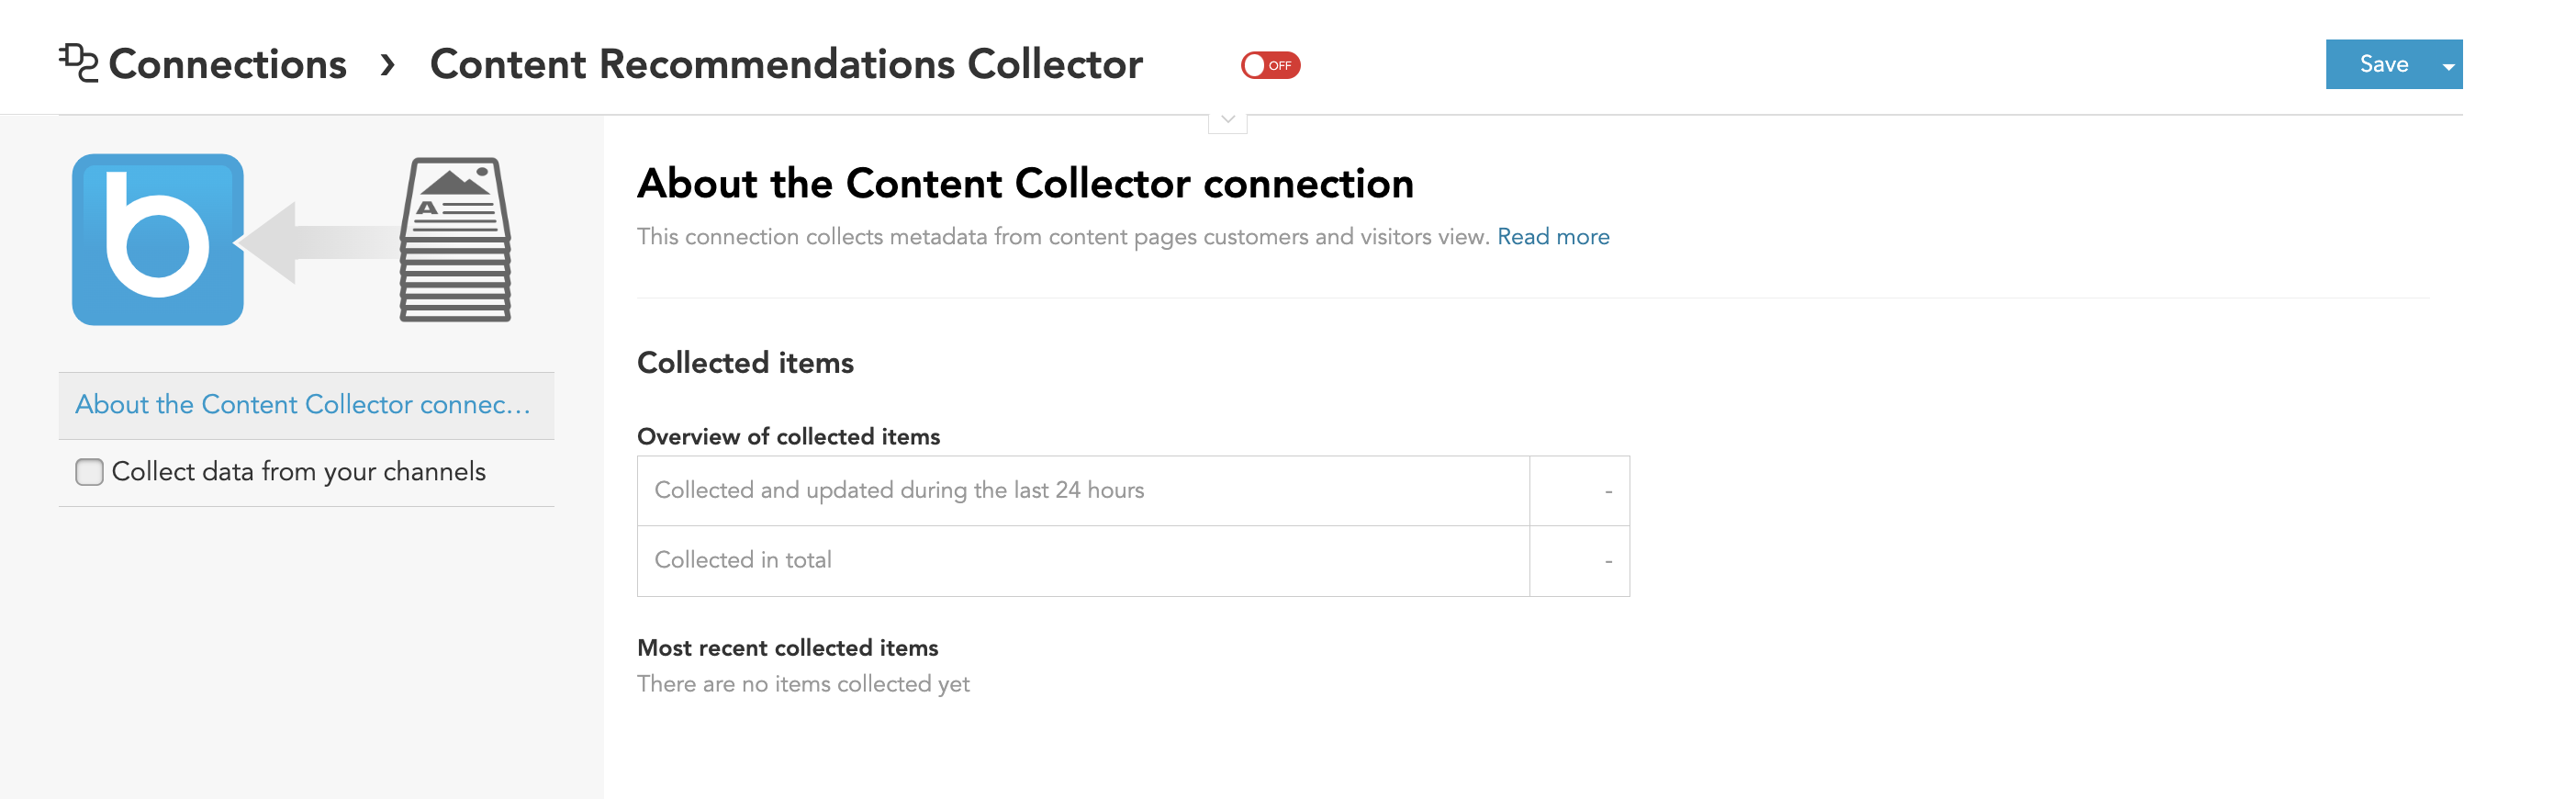 ContentCollectorOverview.png